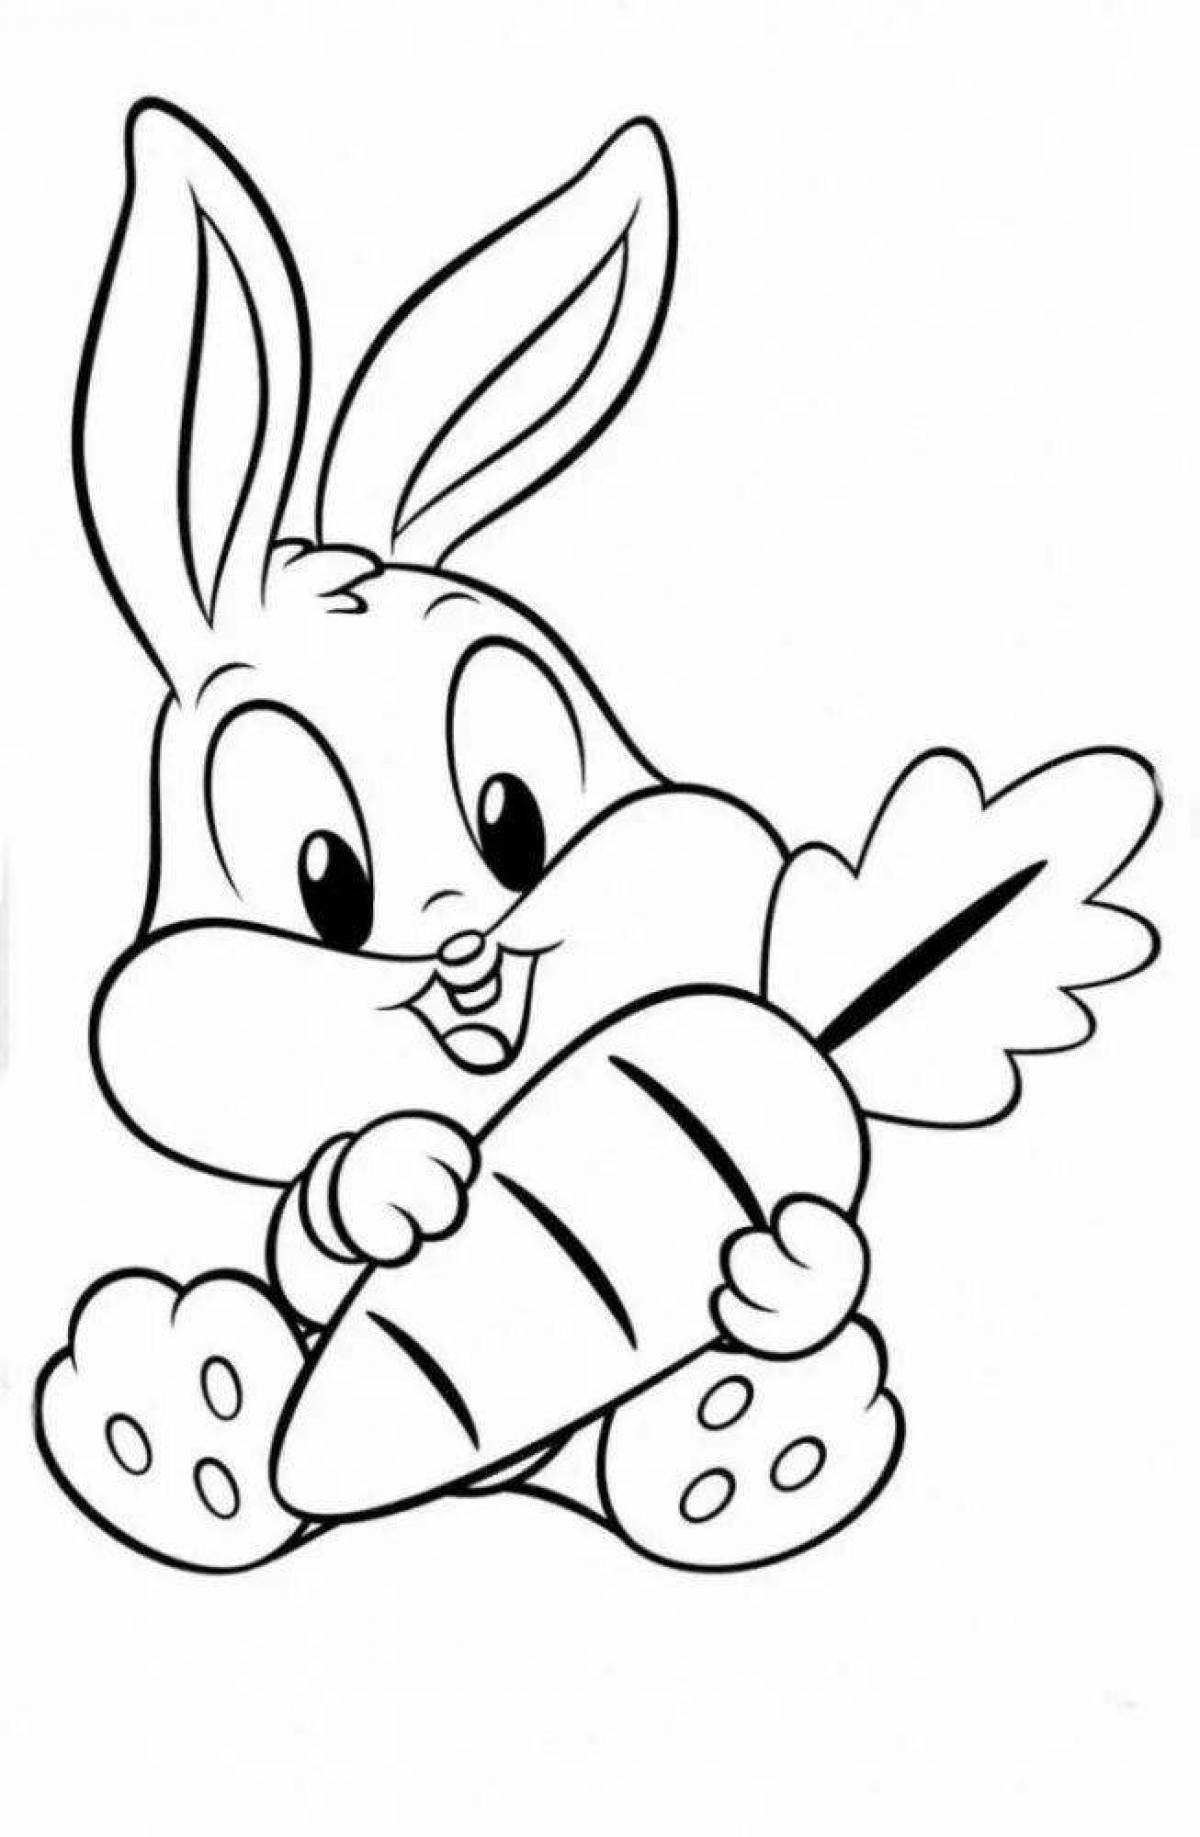 Colored bunny coloring book